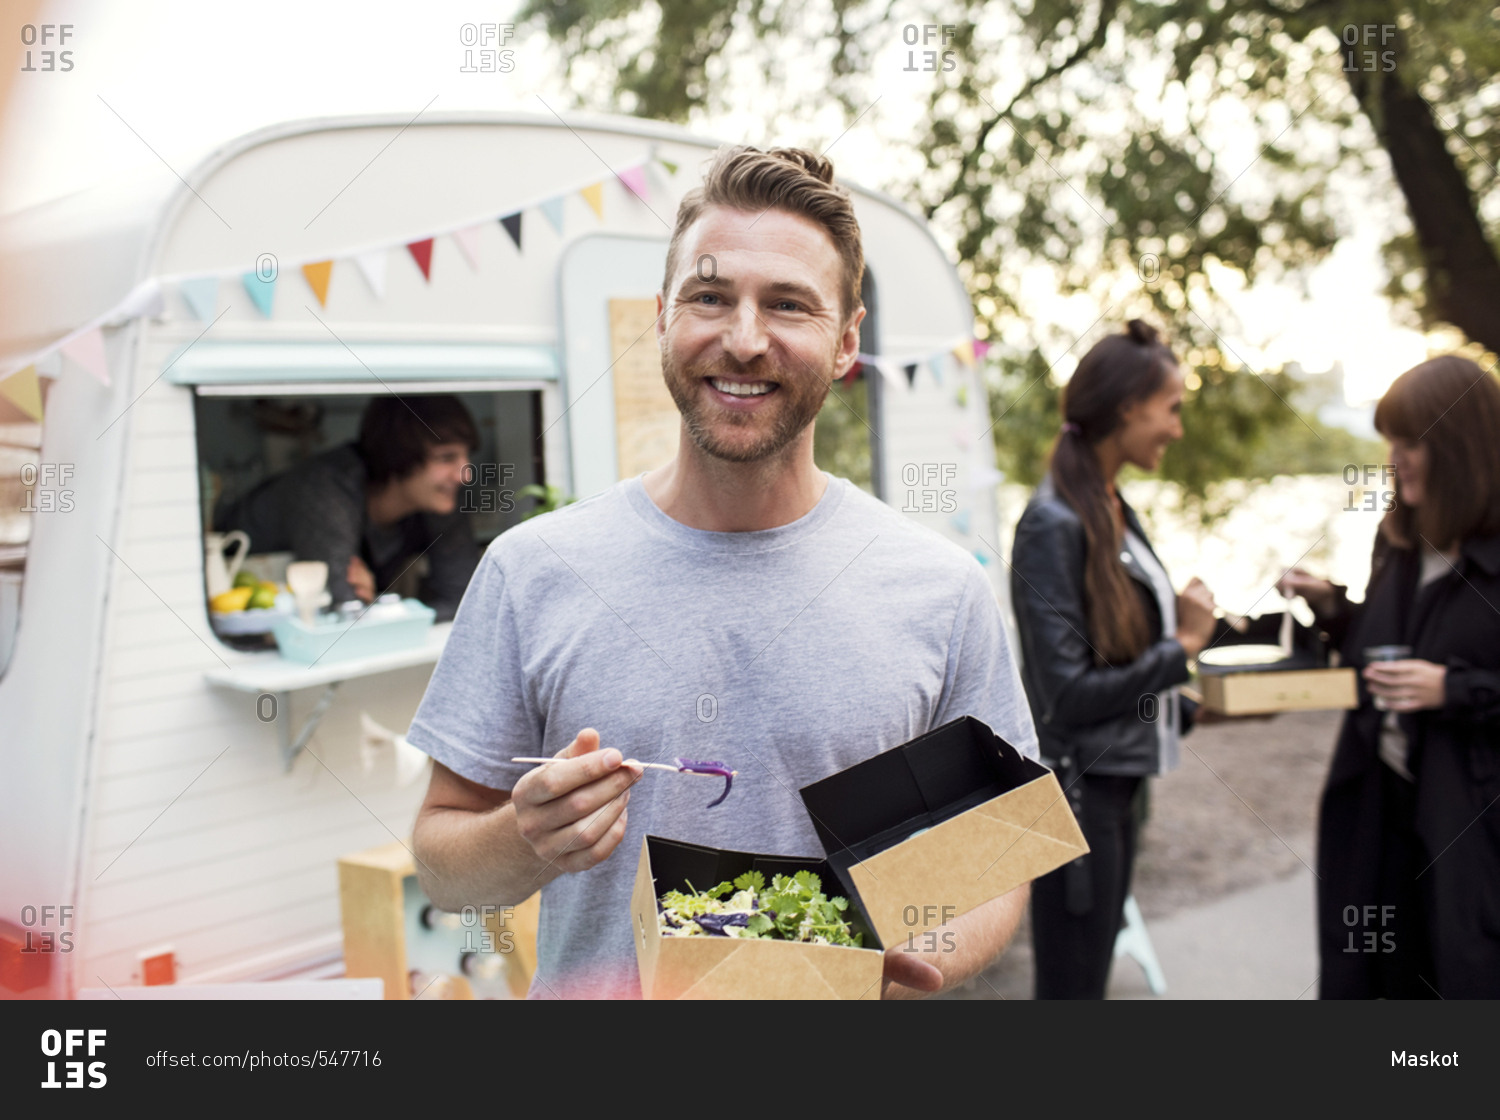 Smiling male customer holding disposable salad box against food truck with friends and owner in background